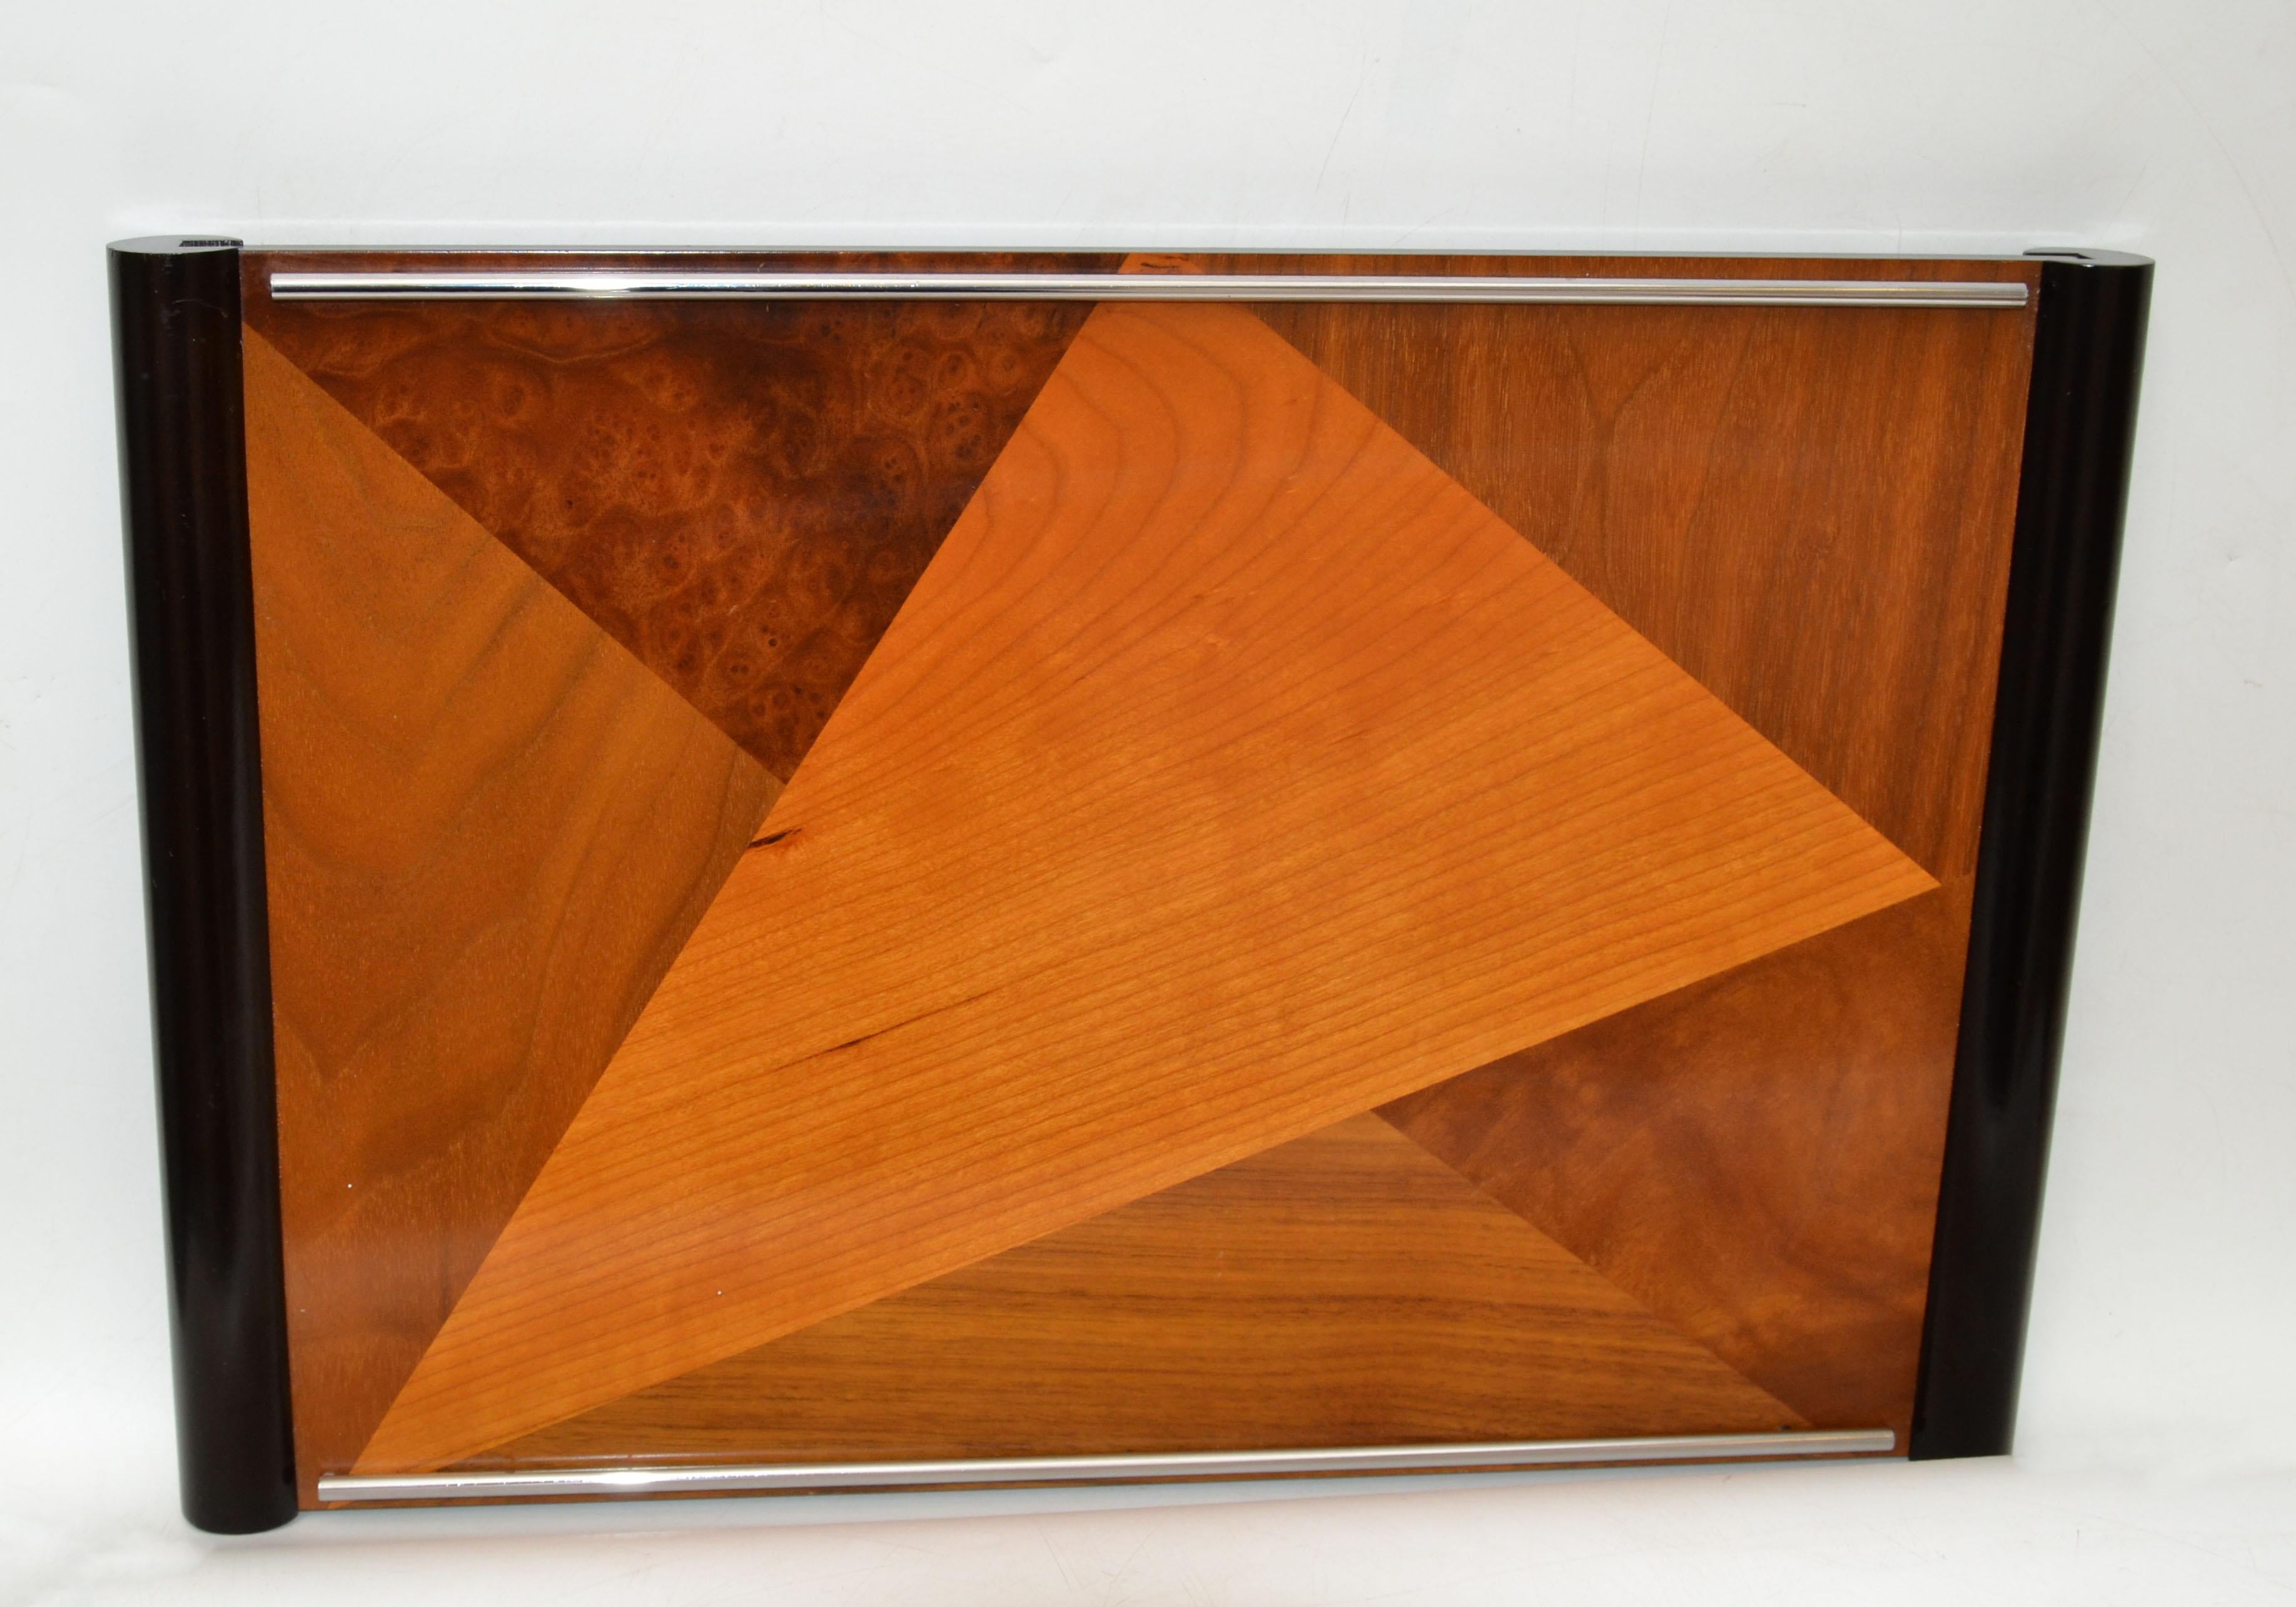 20th Century American Organic Modern Handcrafted Hardwood Marquetry Decorative Serving Tray For Sale